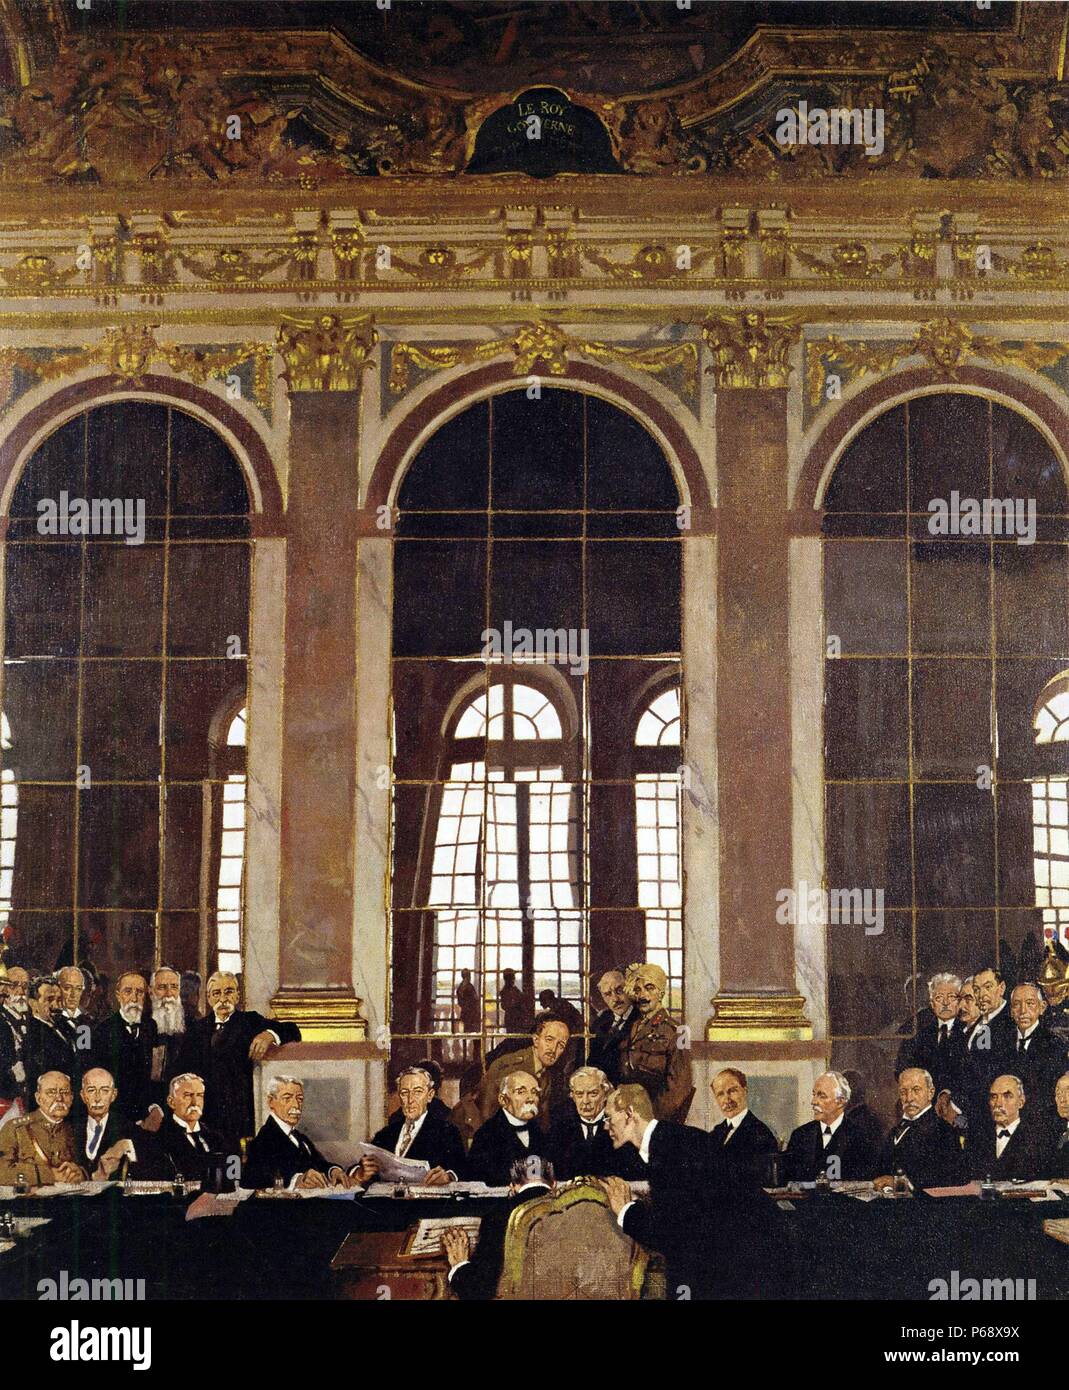 The Signing of Peace in the Hall of Mirrors, Versailles. Painted by William Orpen (1878-1931), an Irish portrait painter who worked mainly in London. Dated 1919. Stock Photo